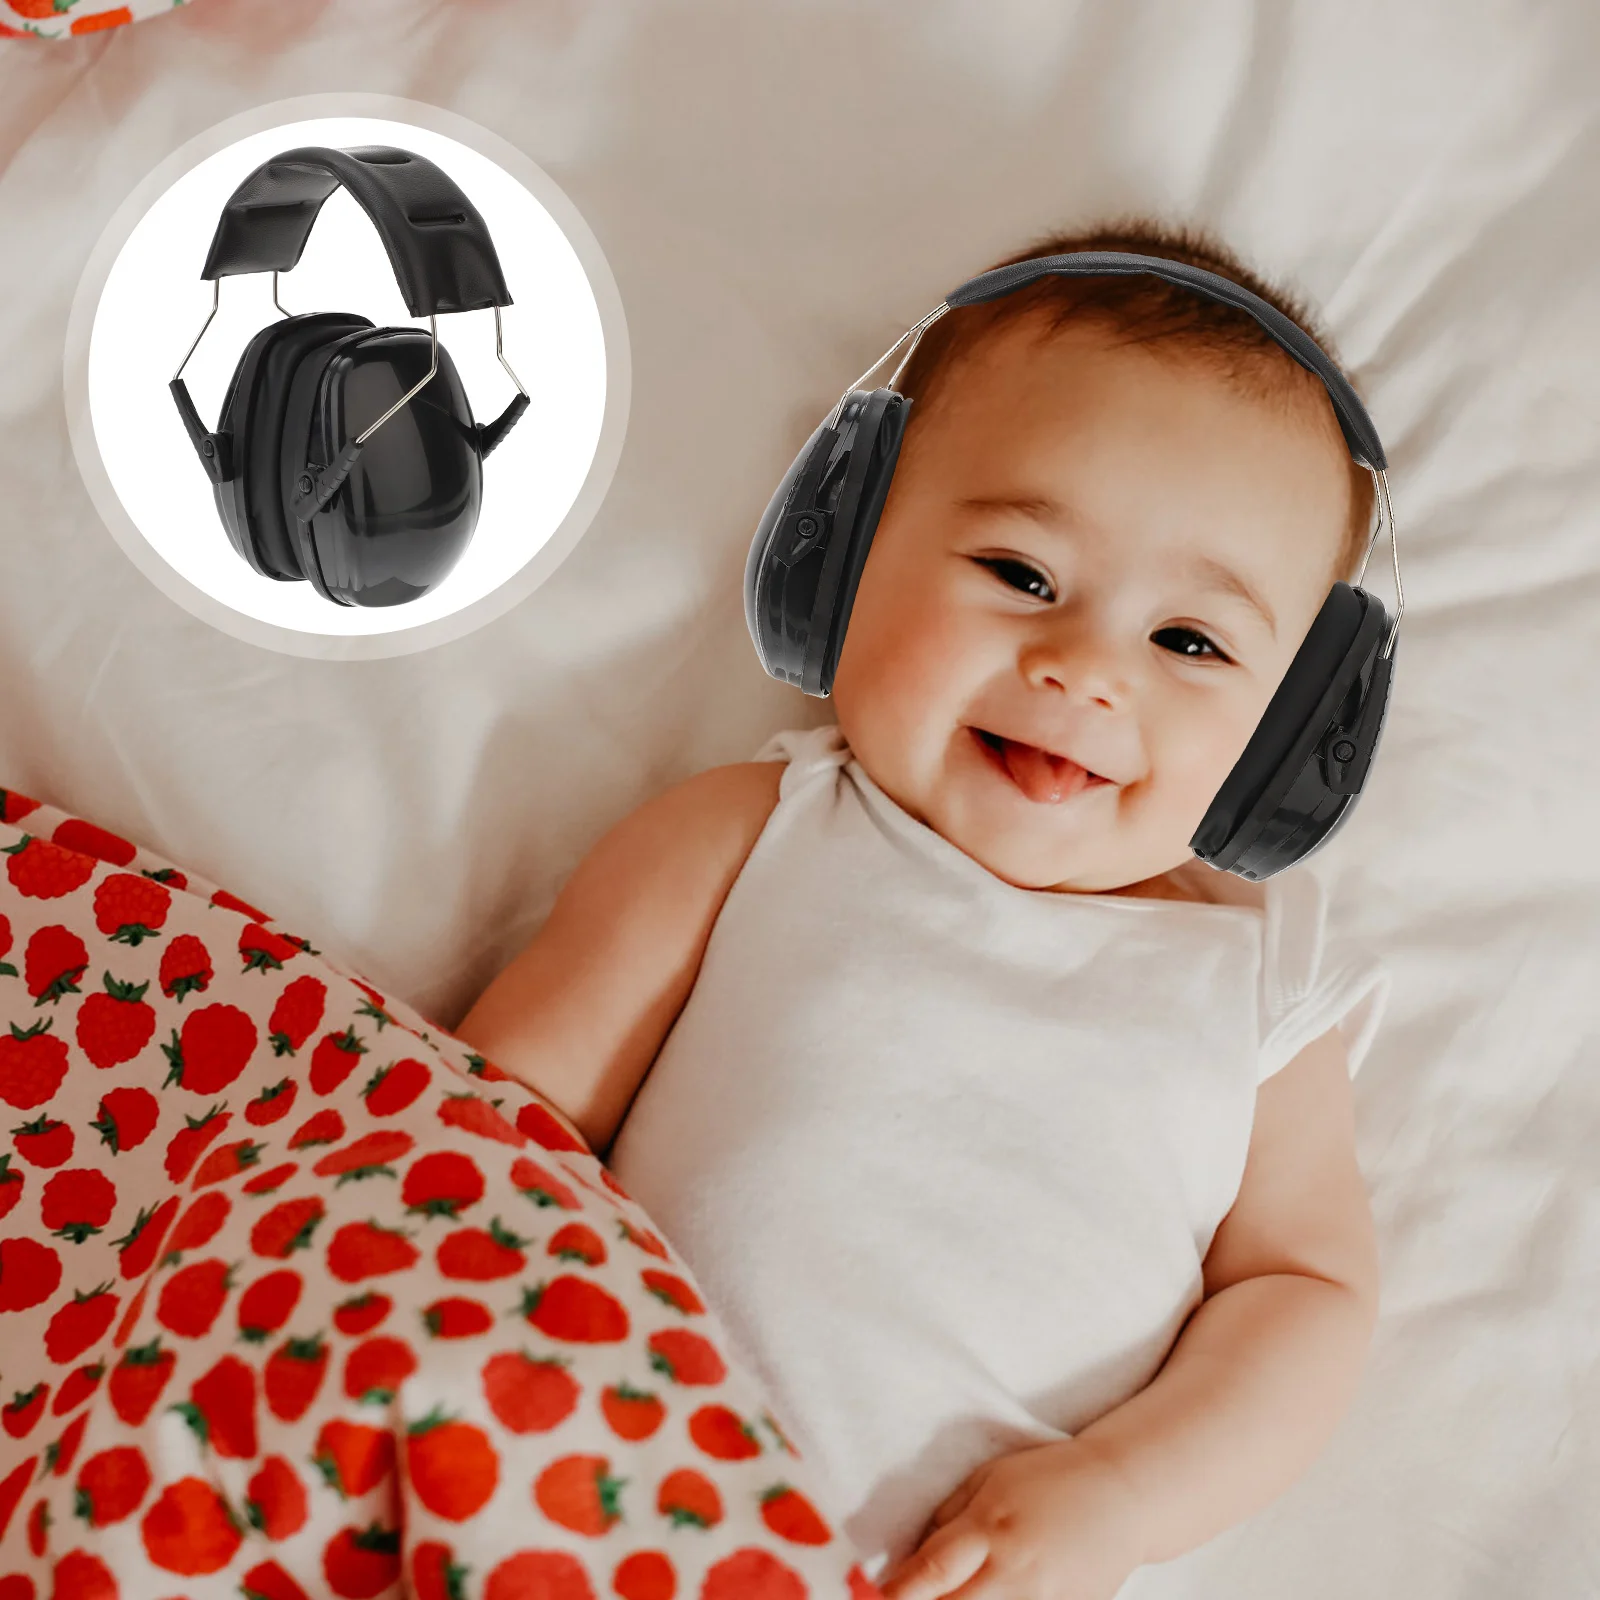 

Children's Noise Canceling Headphones Ear Muffs Reduction Kids Low Hearing Protection Shooting Abs Student Earphones